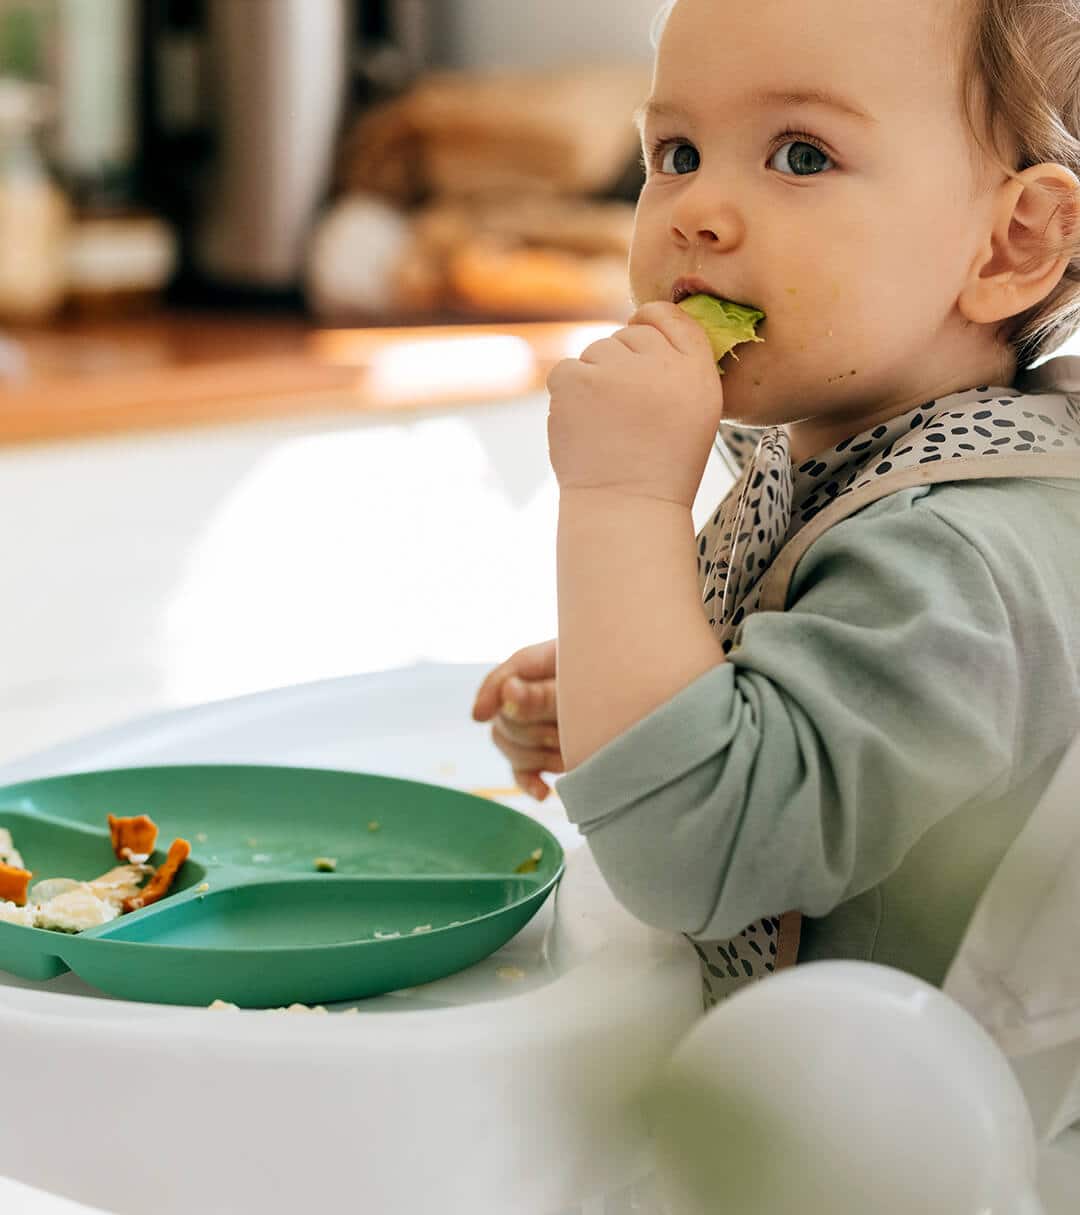 Baby eating food using his hand